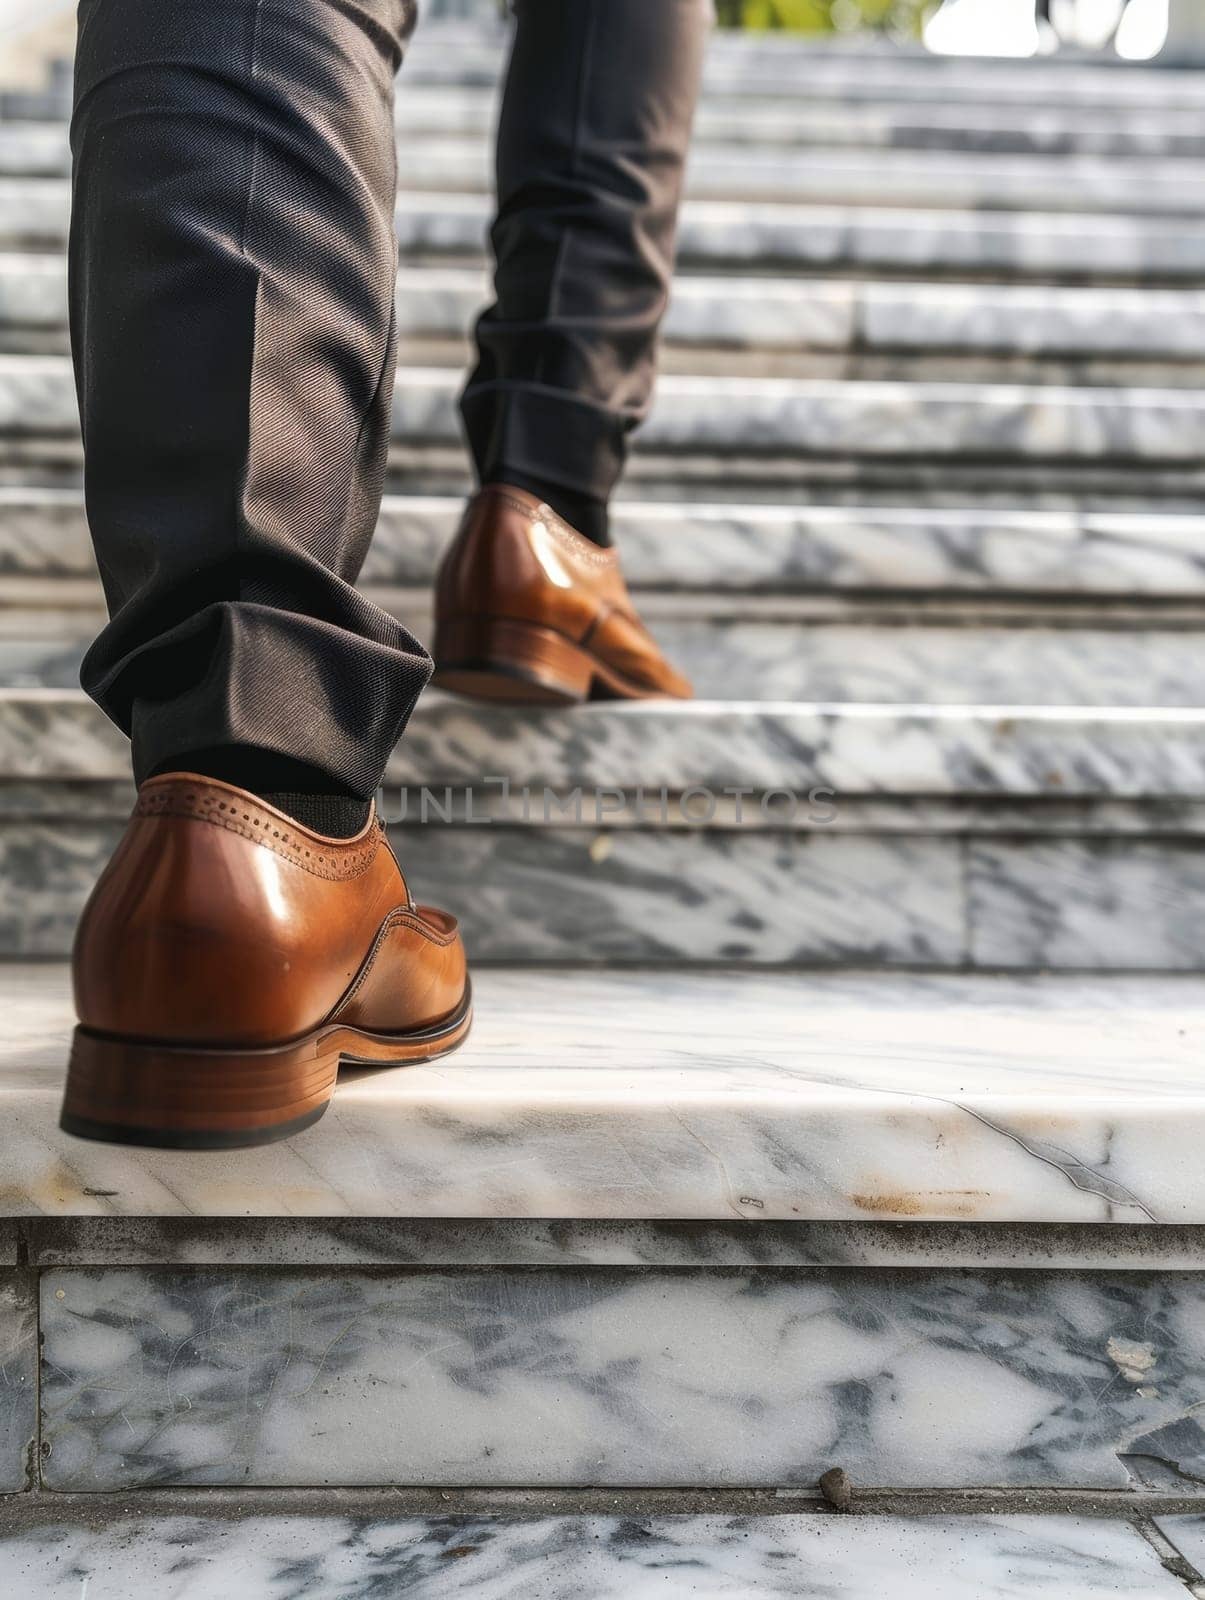 Close-up of a persons feet in polished brown dress shoes, ascending marble steps, capturing a moment of upward mobility